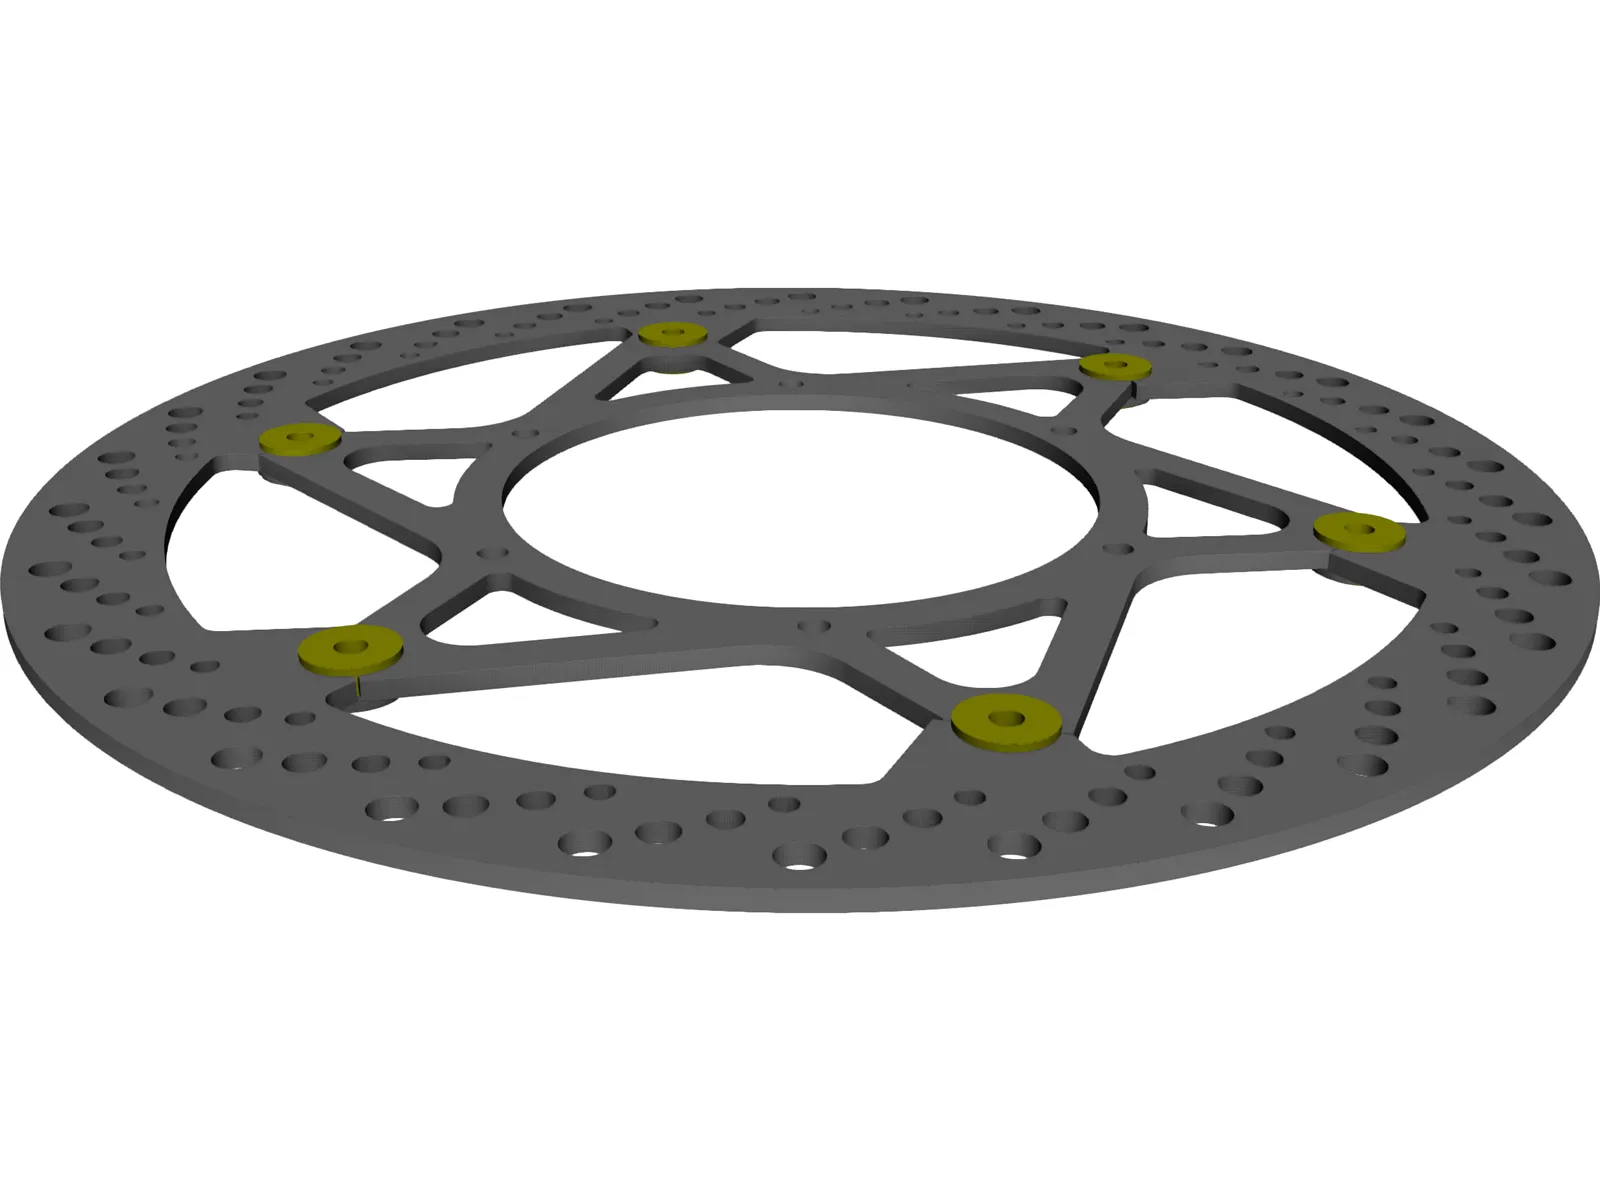 Magura Disc 320mm Complete Right Side 3D Model